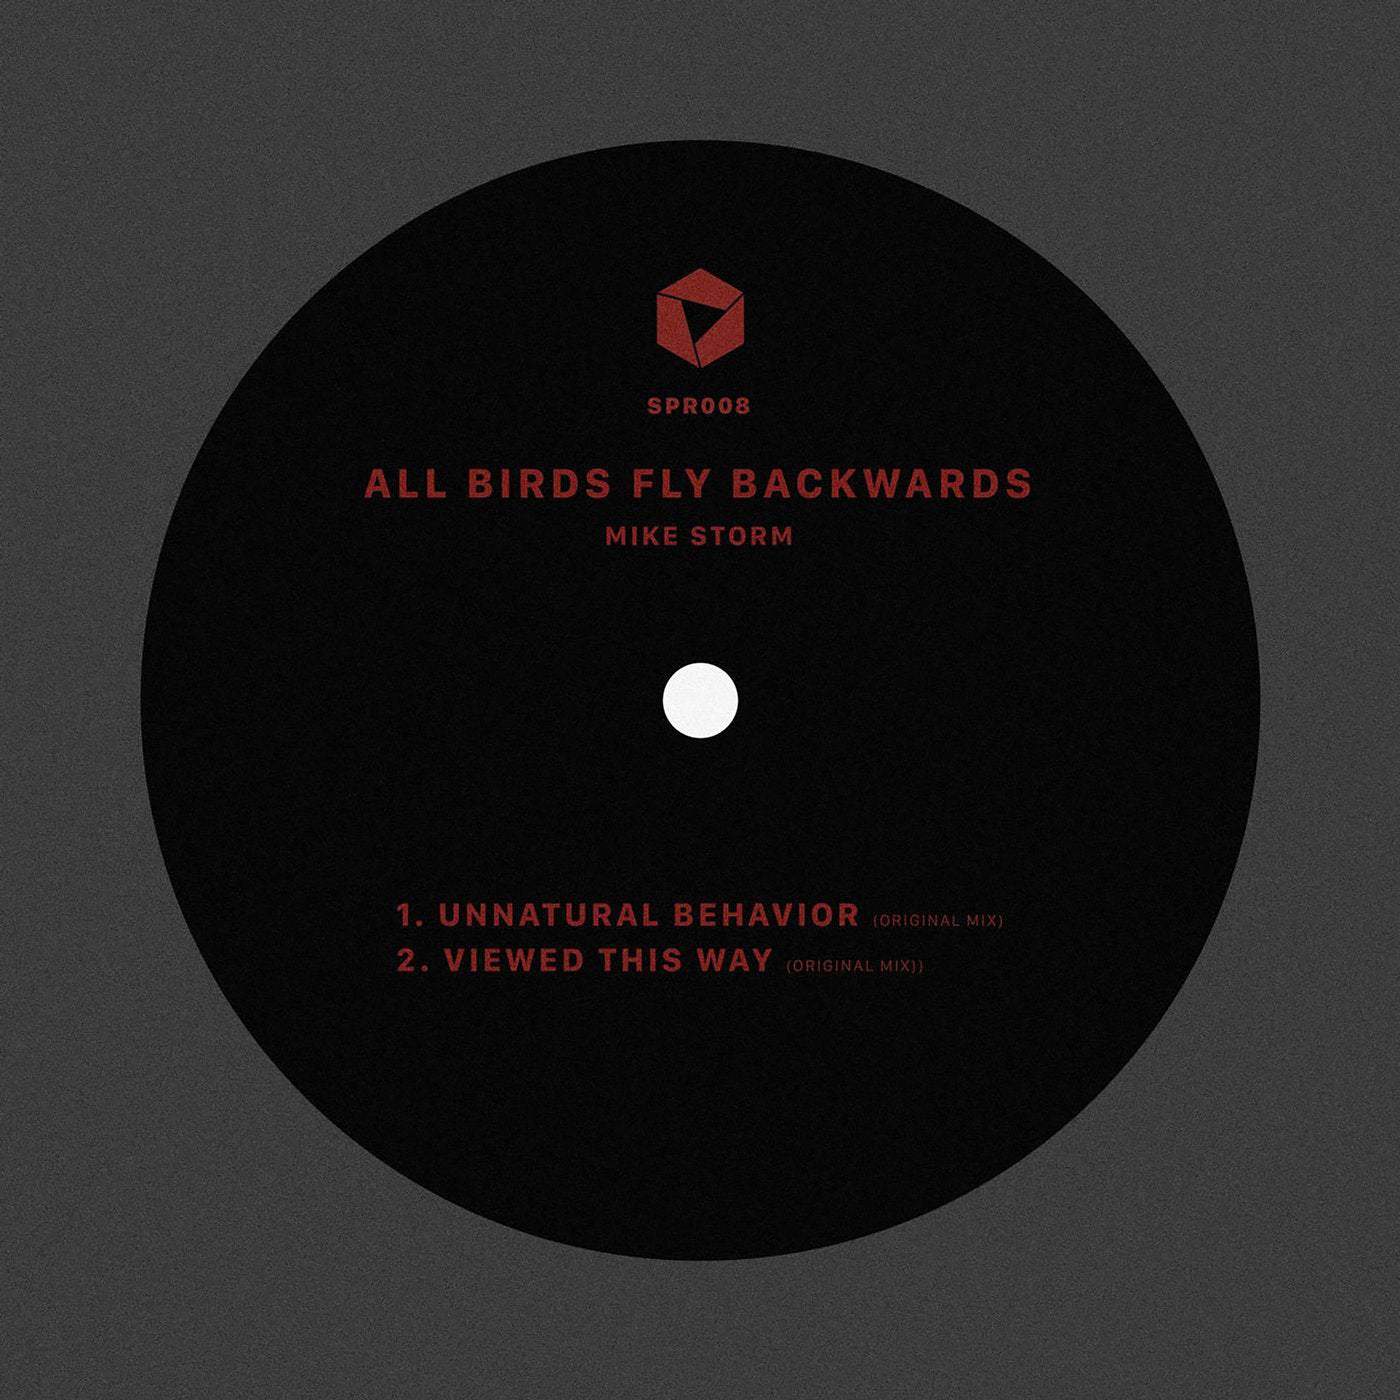 image cover: Mike Storm - All Birds Fly Backwards / SPRB008